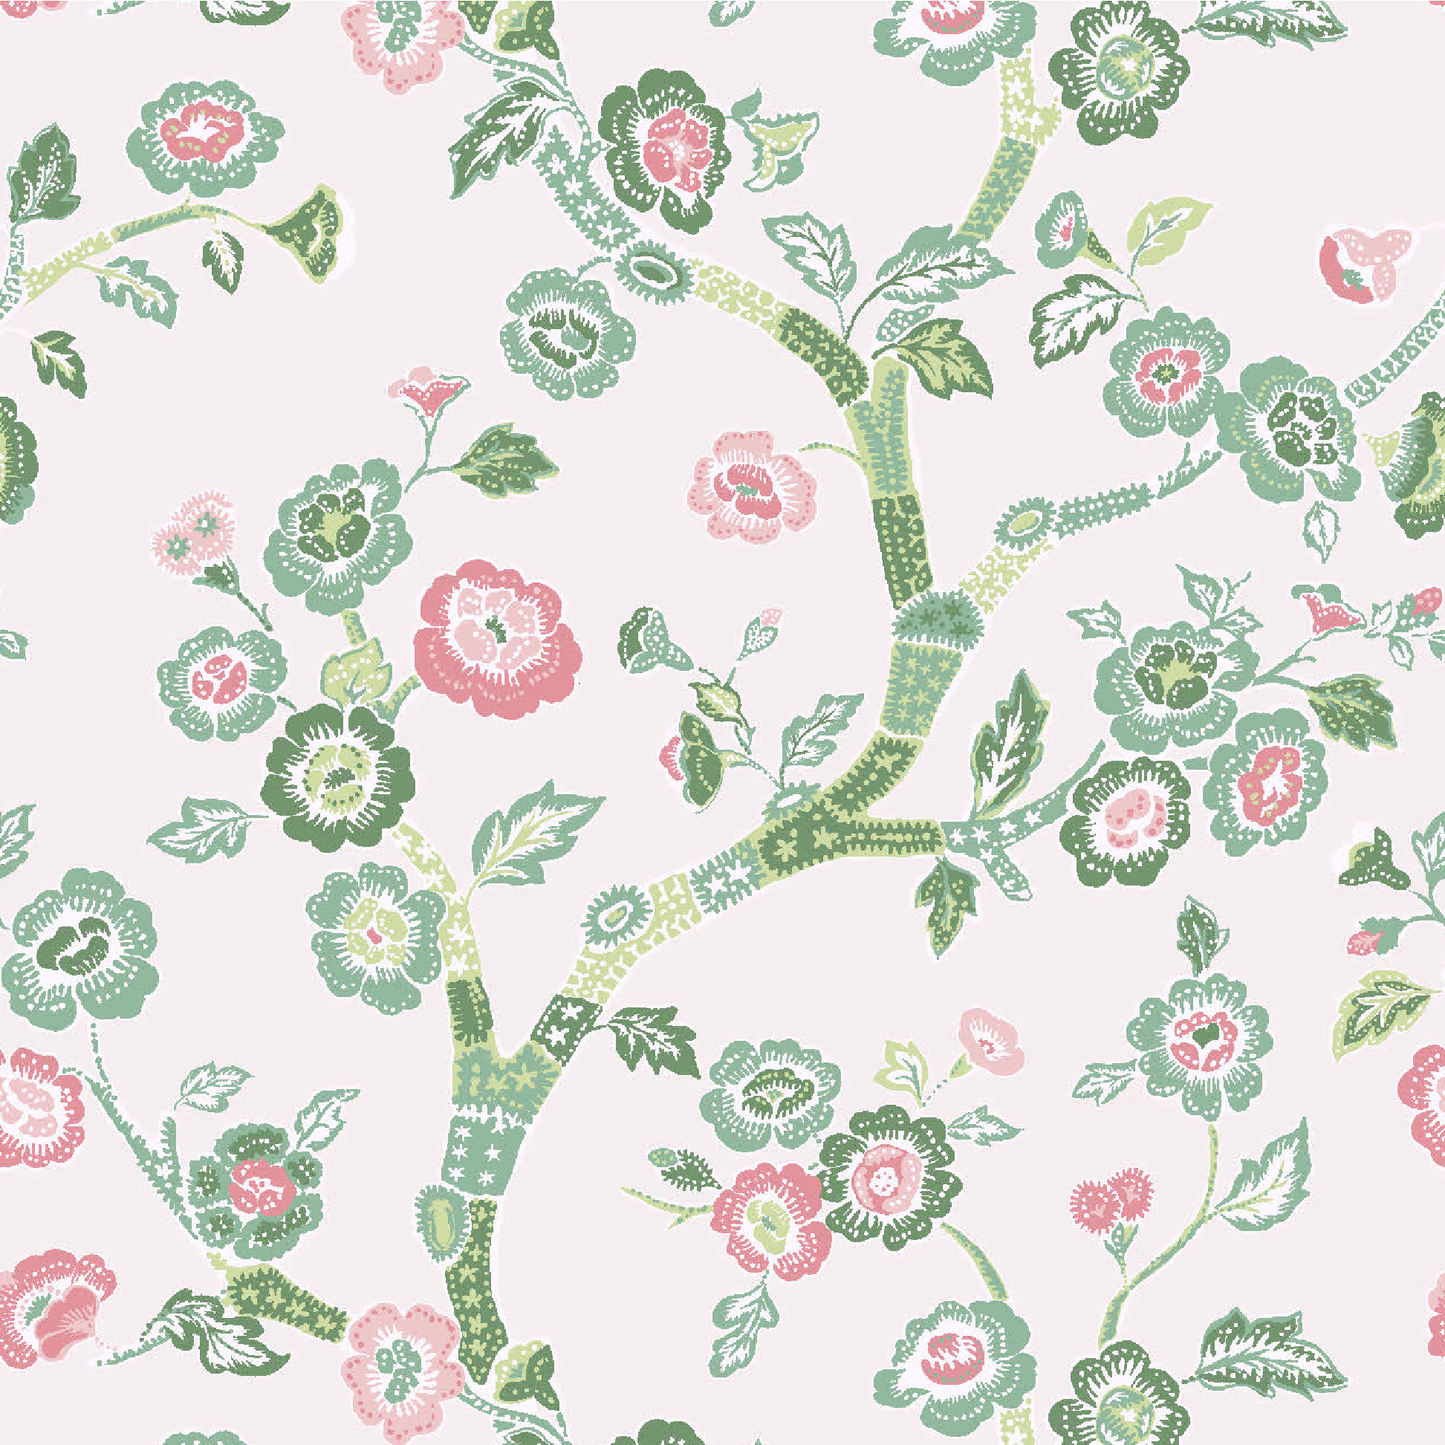 Temple Garden Celadon Outdoor Fabric by the Yard